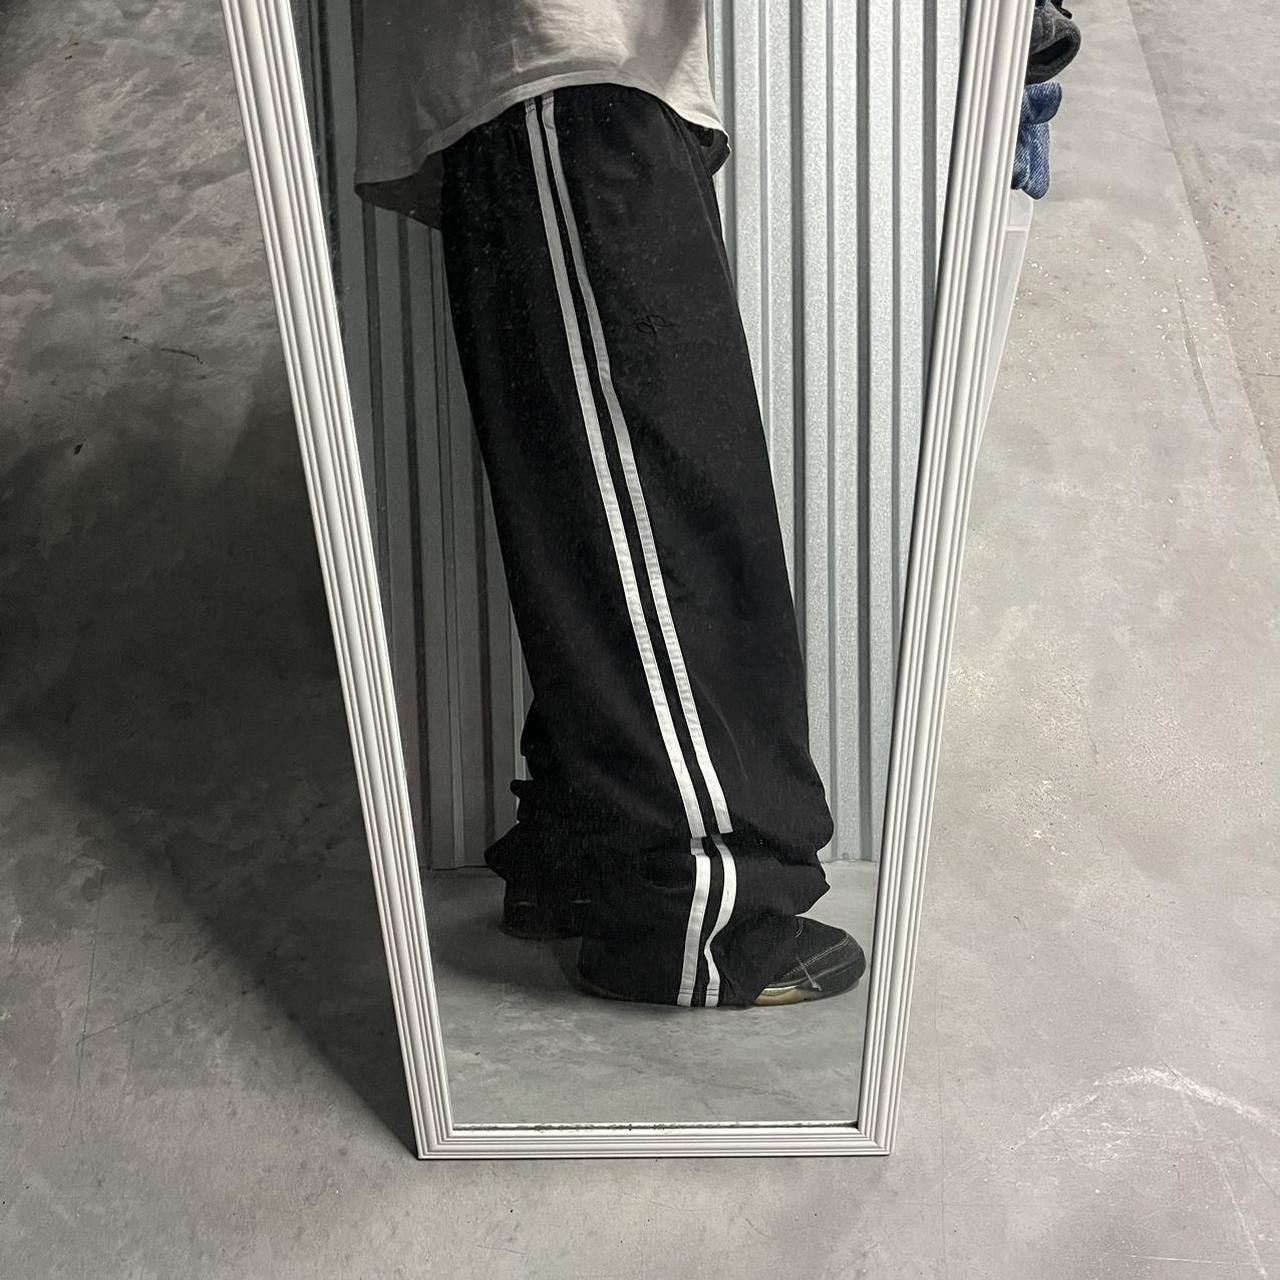 Pre-owned Adidas X Vintage Crazy Vintage Y2k/2000s Baggy Black Striped Adidas Style Wide Leg Track Pants!